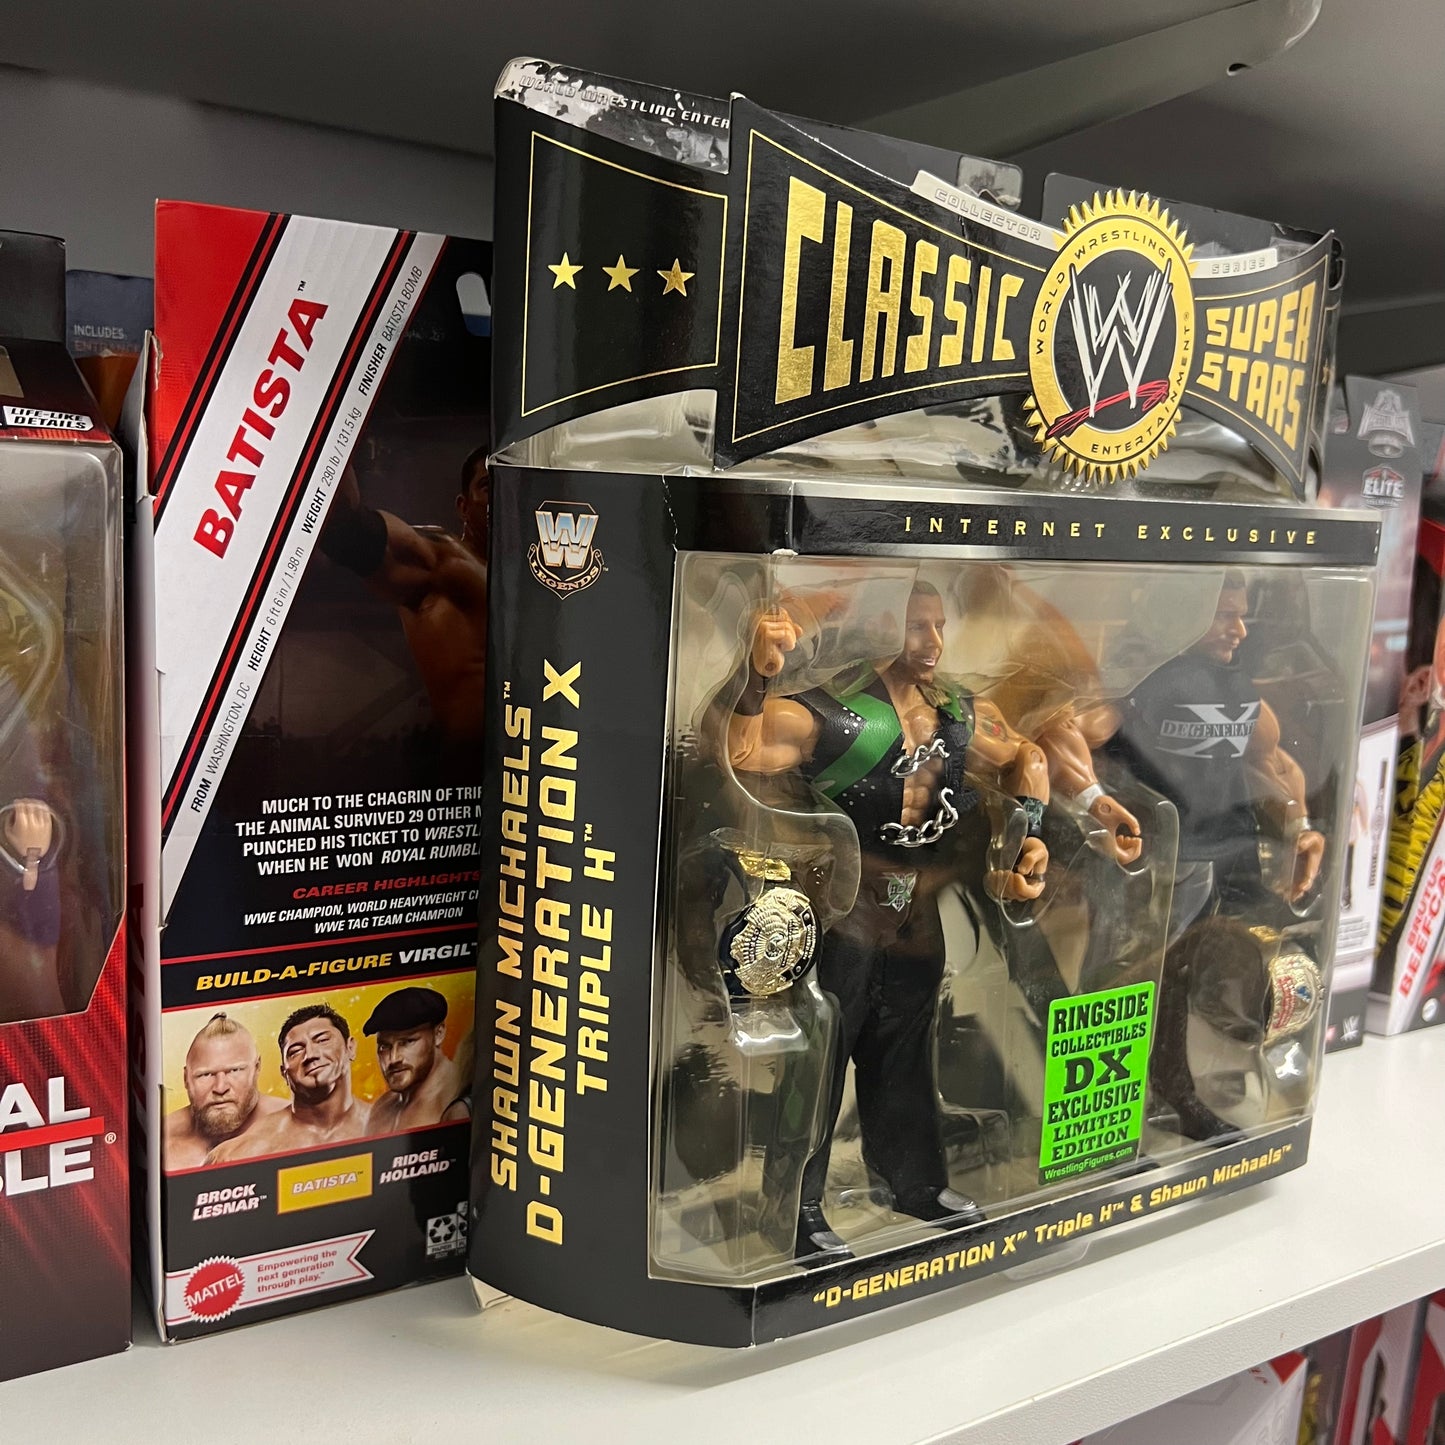 DX Triple H and Shawn Michaels - WWE Classic Superstars 2 Pack Ringside Exclusive Action Figures